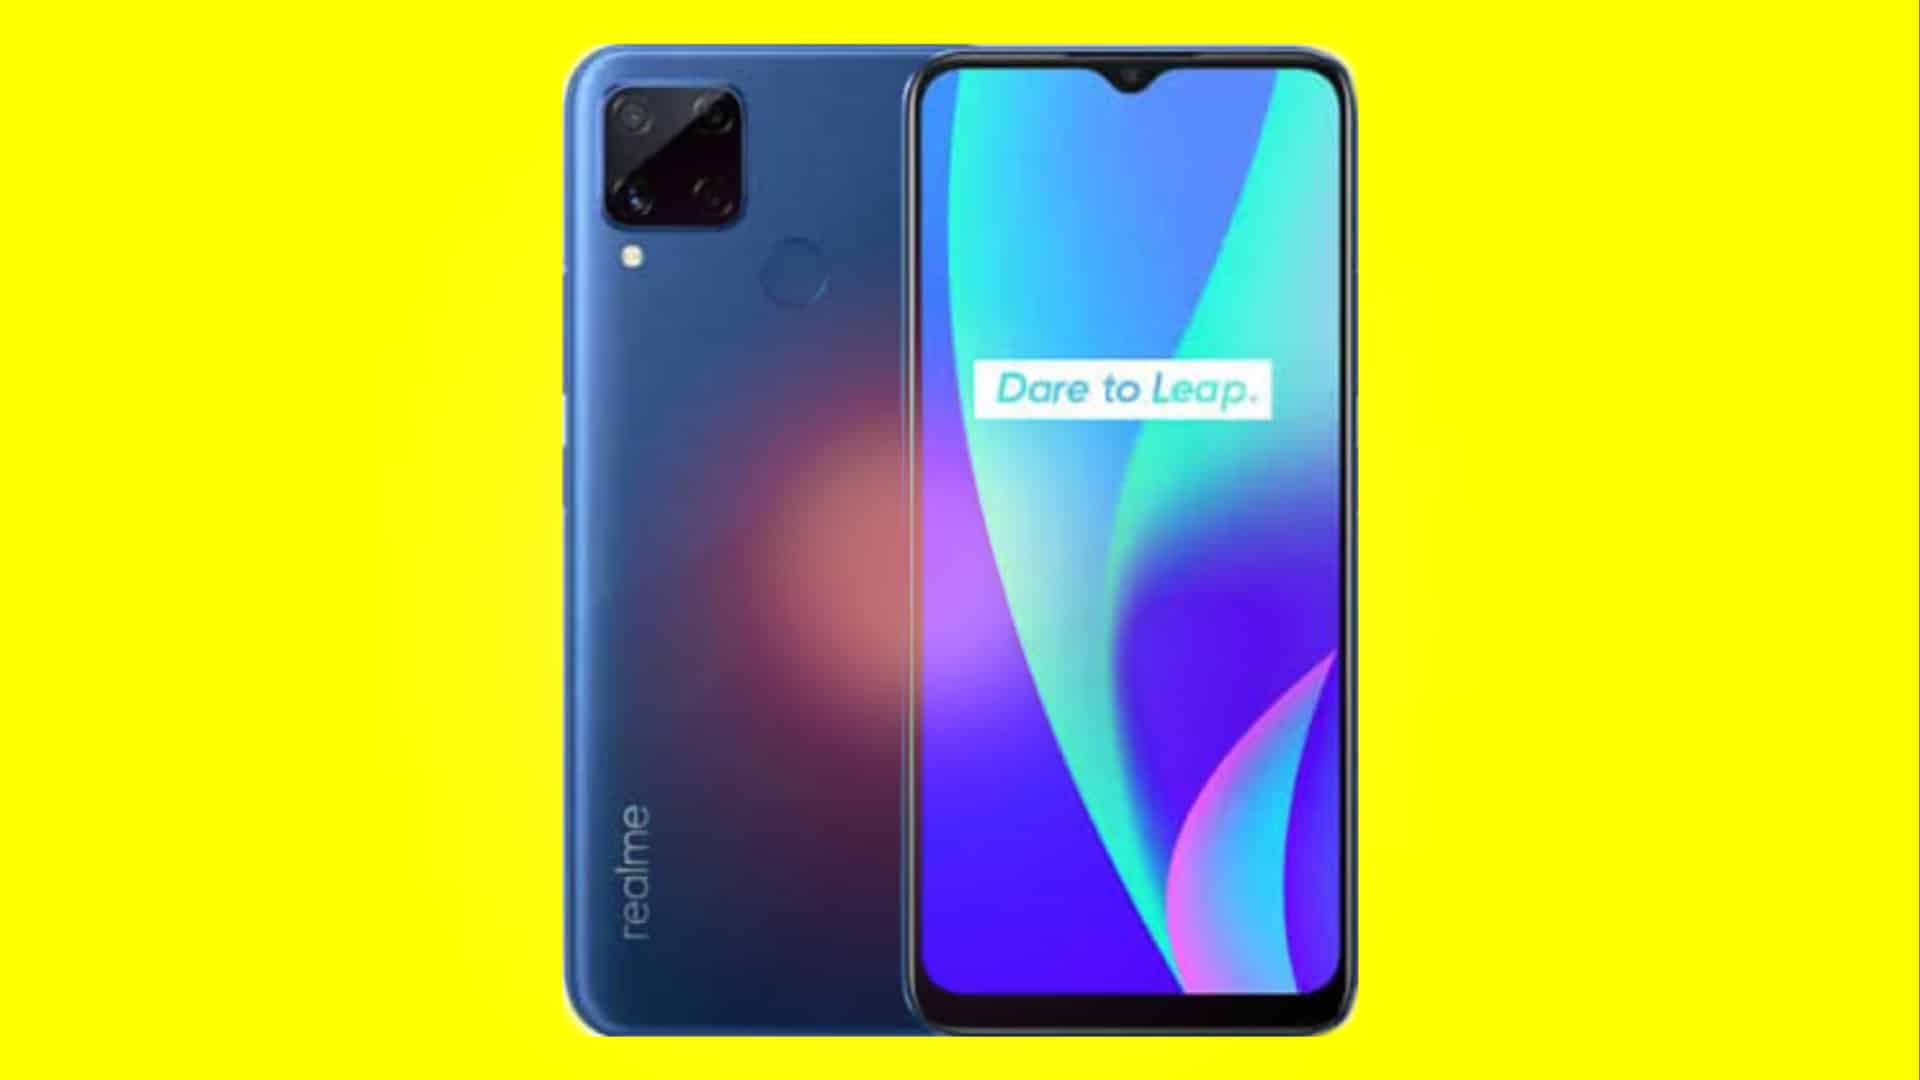 Realme Launches Two New C12 and C15 Budget Smartphones in India